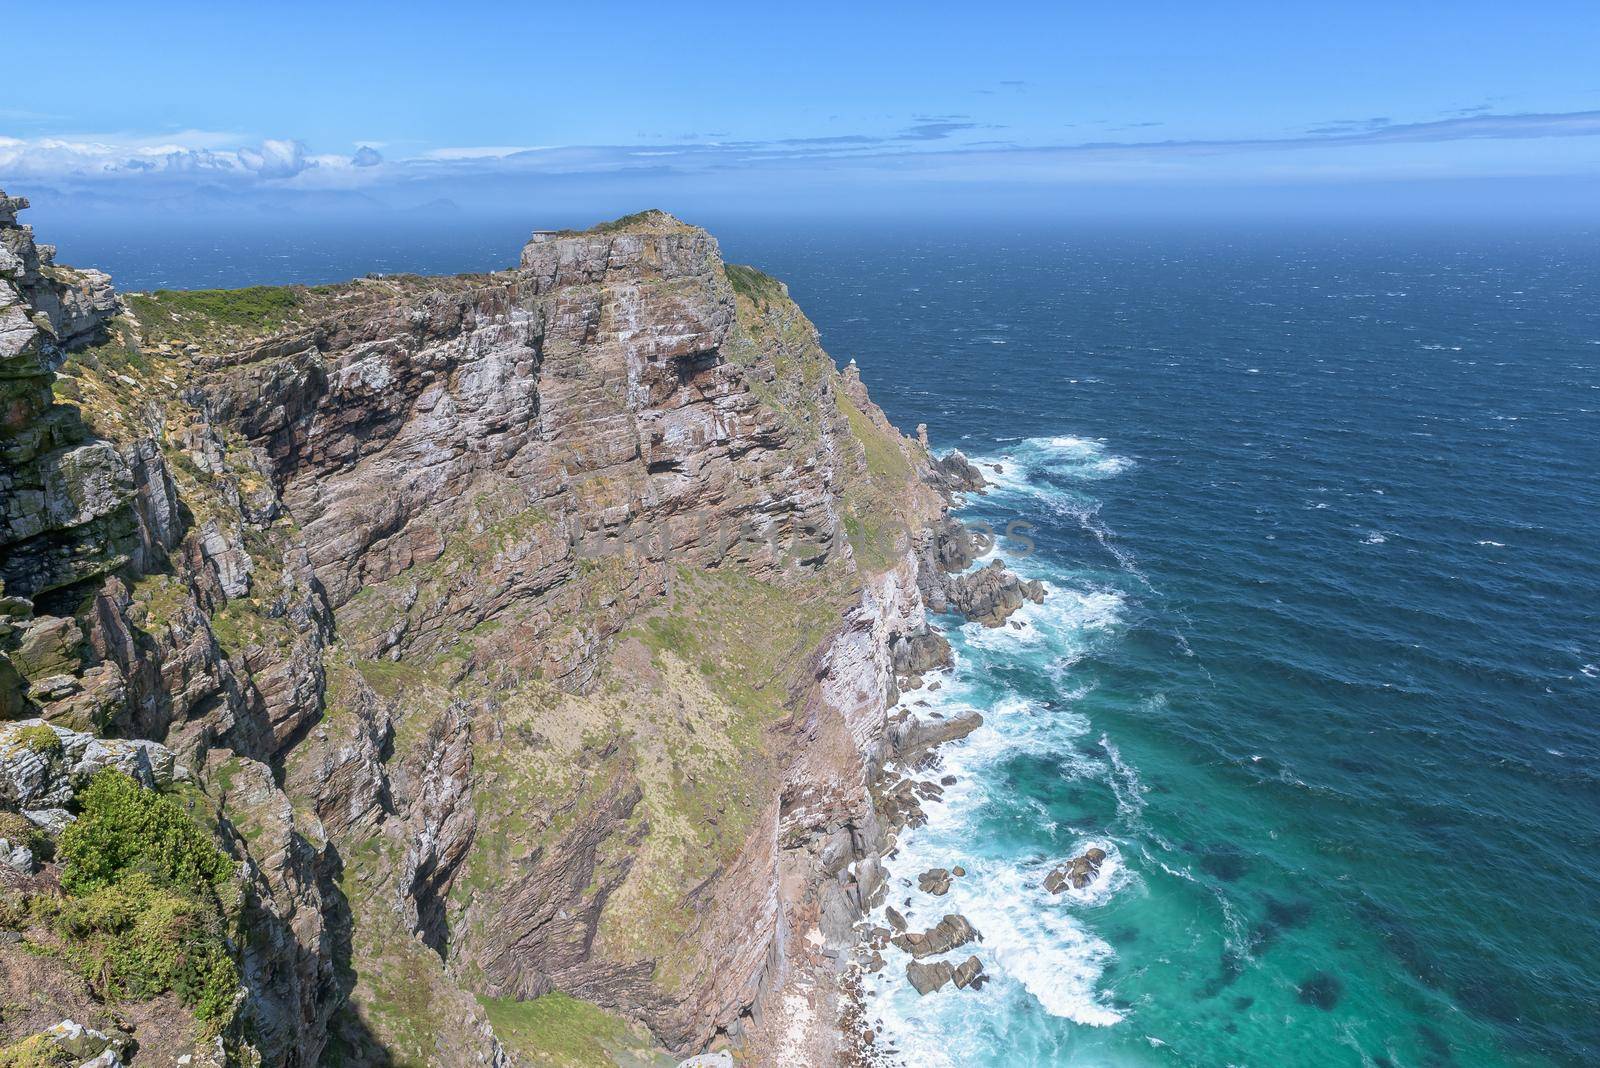 The new lighthouse is visible at Cape Point